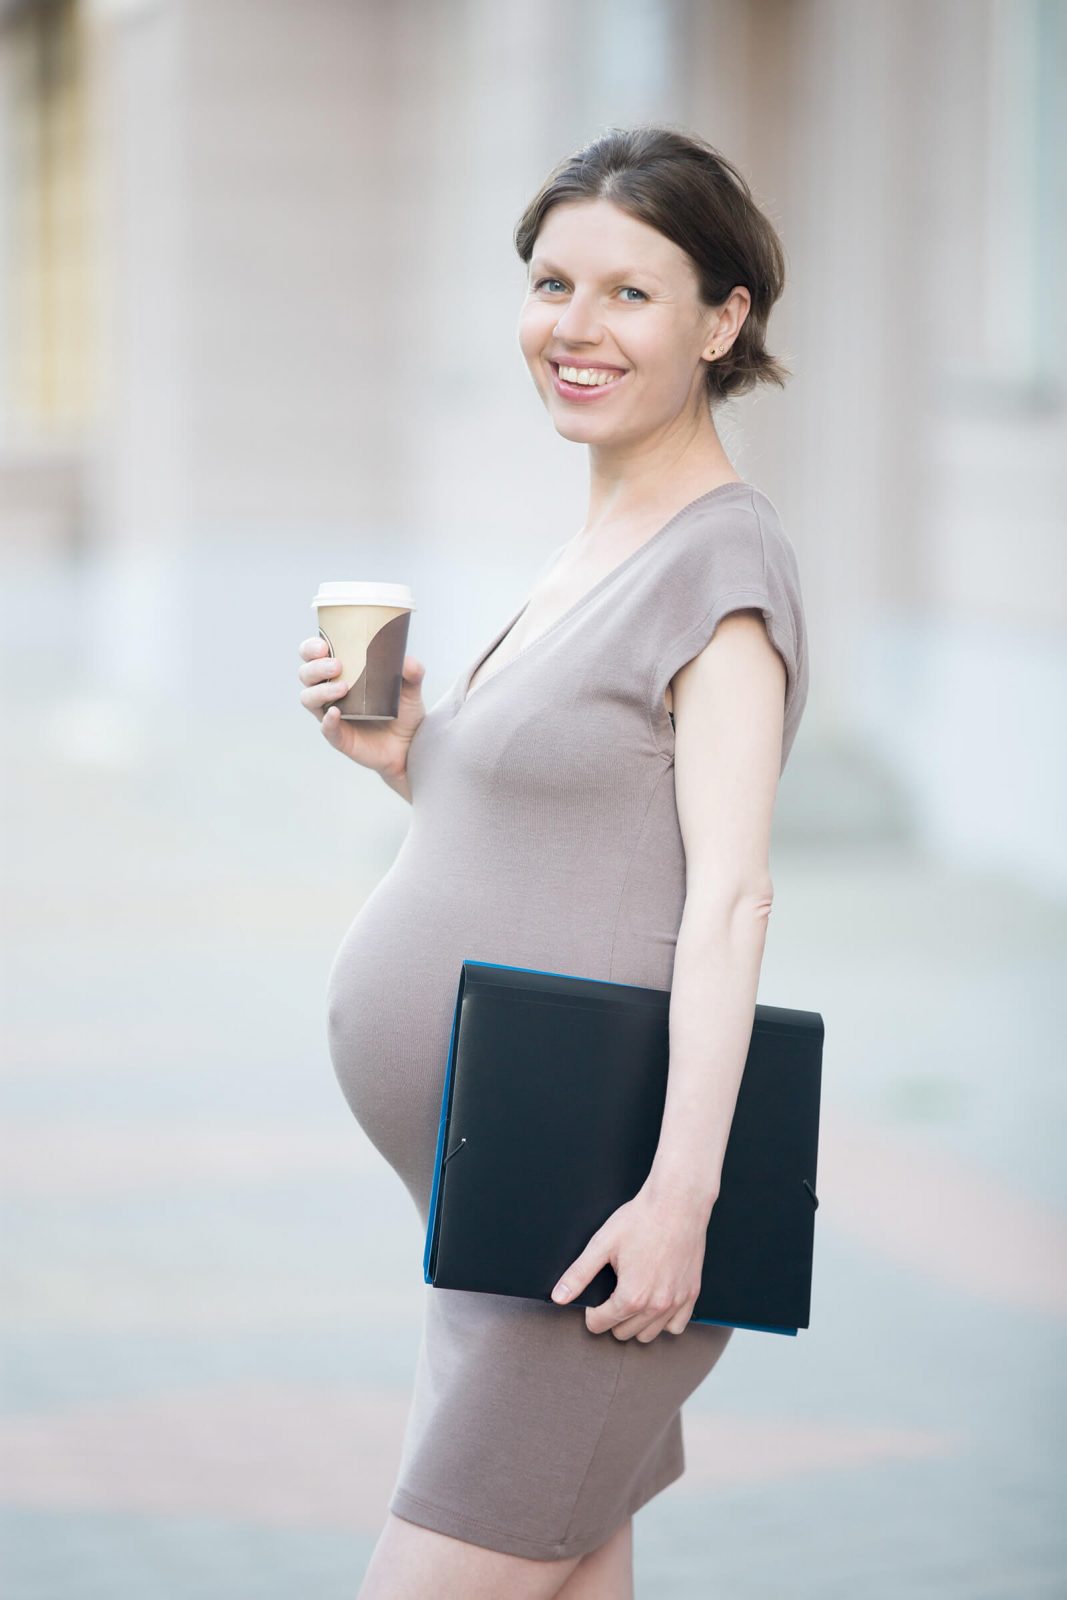 Read more about the article Caffeine & Pregnancy: A Good Mix?